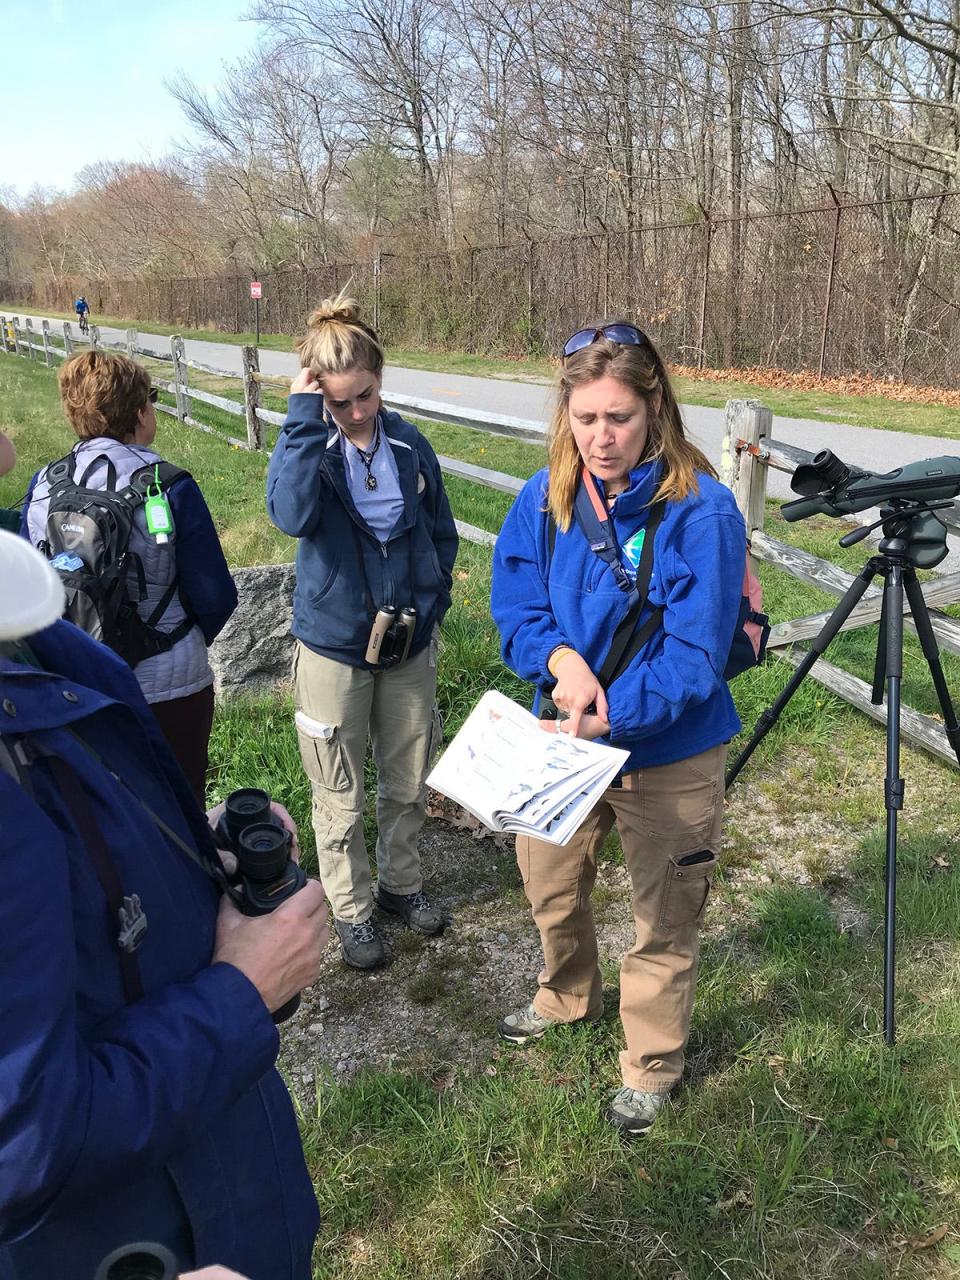 Laura Carberry, a guide for the Audubon Society of Rhode Island, leads a group bird walk at Calf Pasture Nature Area, a prime spot for many species.